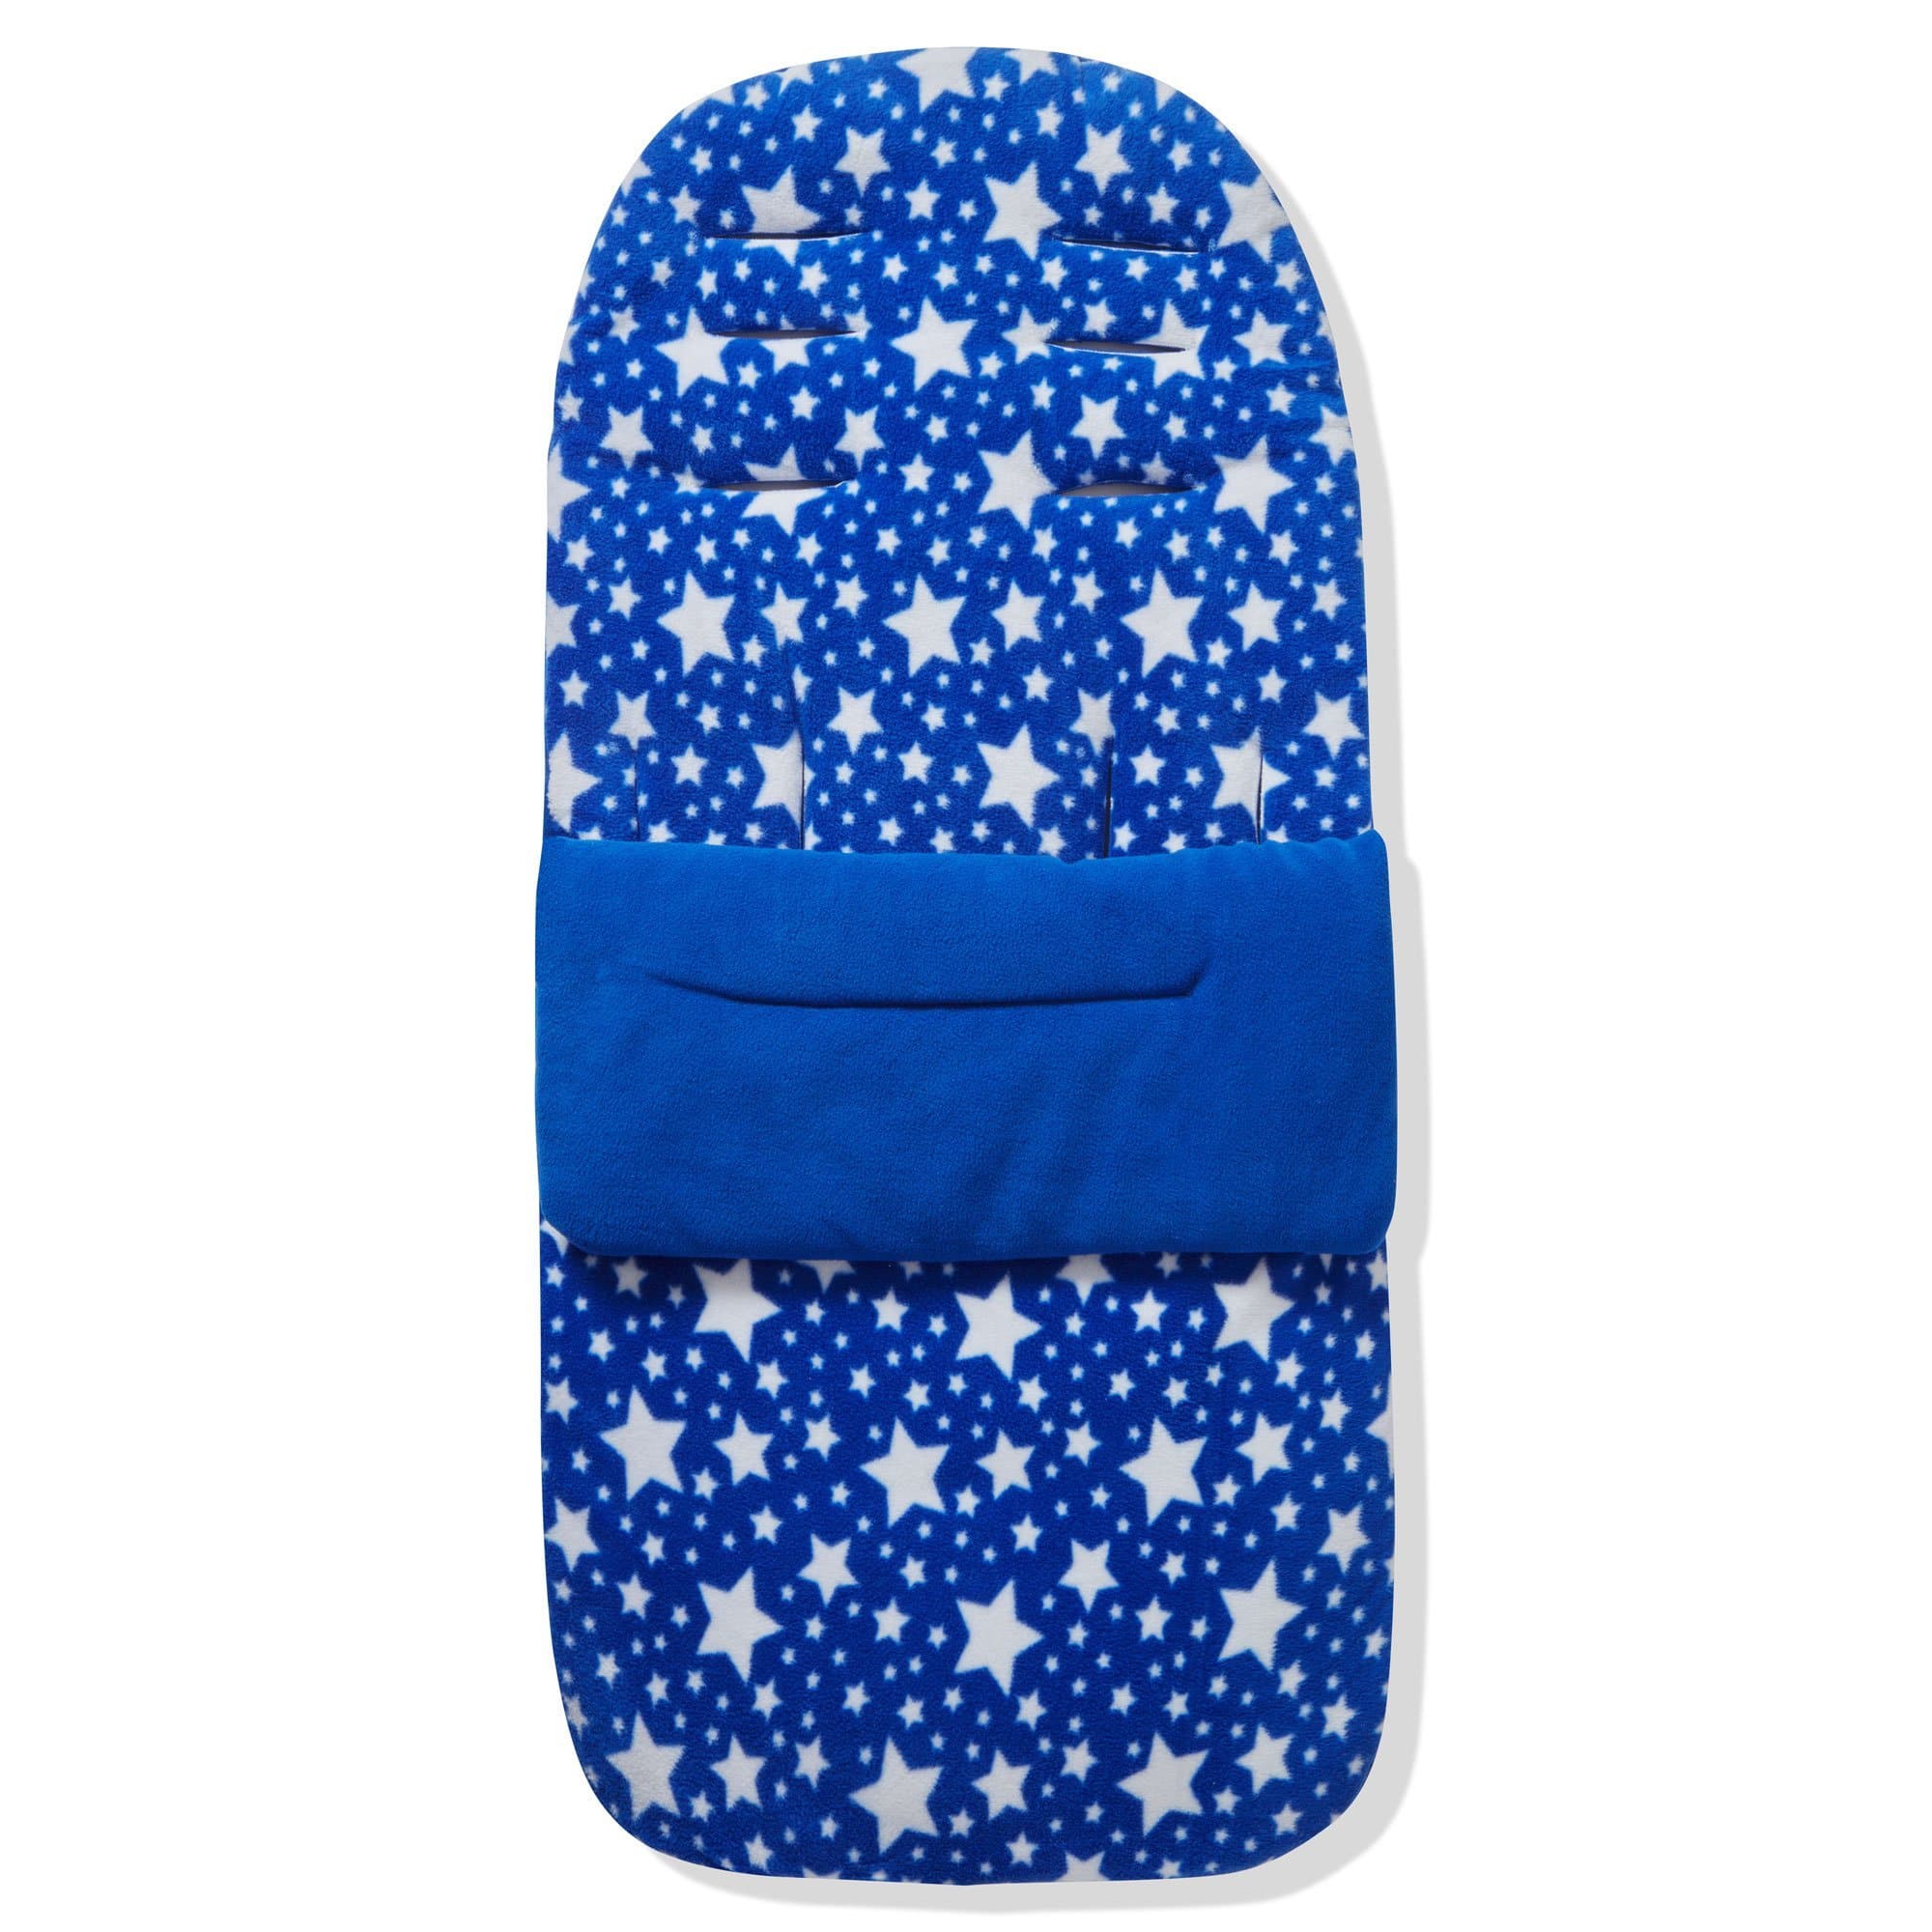 Fleece Footmuff / Cosy Toes Compatible With BabyCare - Blue Star / Fits All Models | For Your Little One